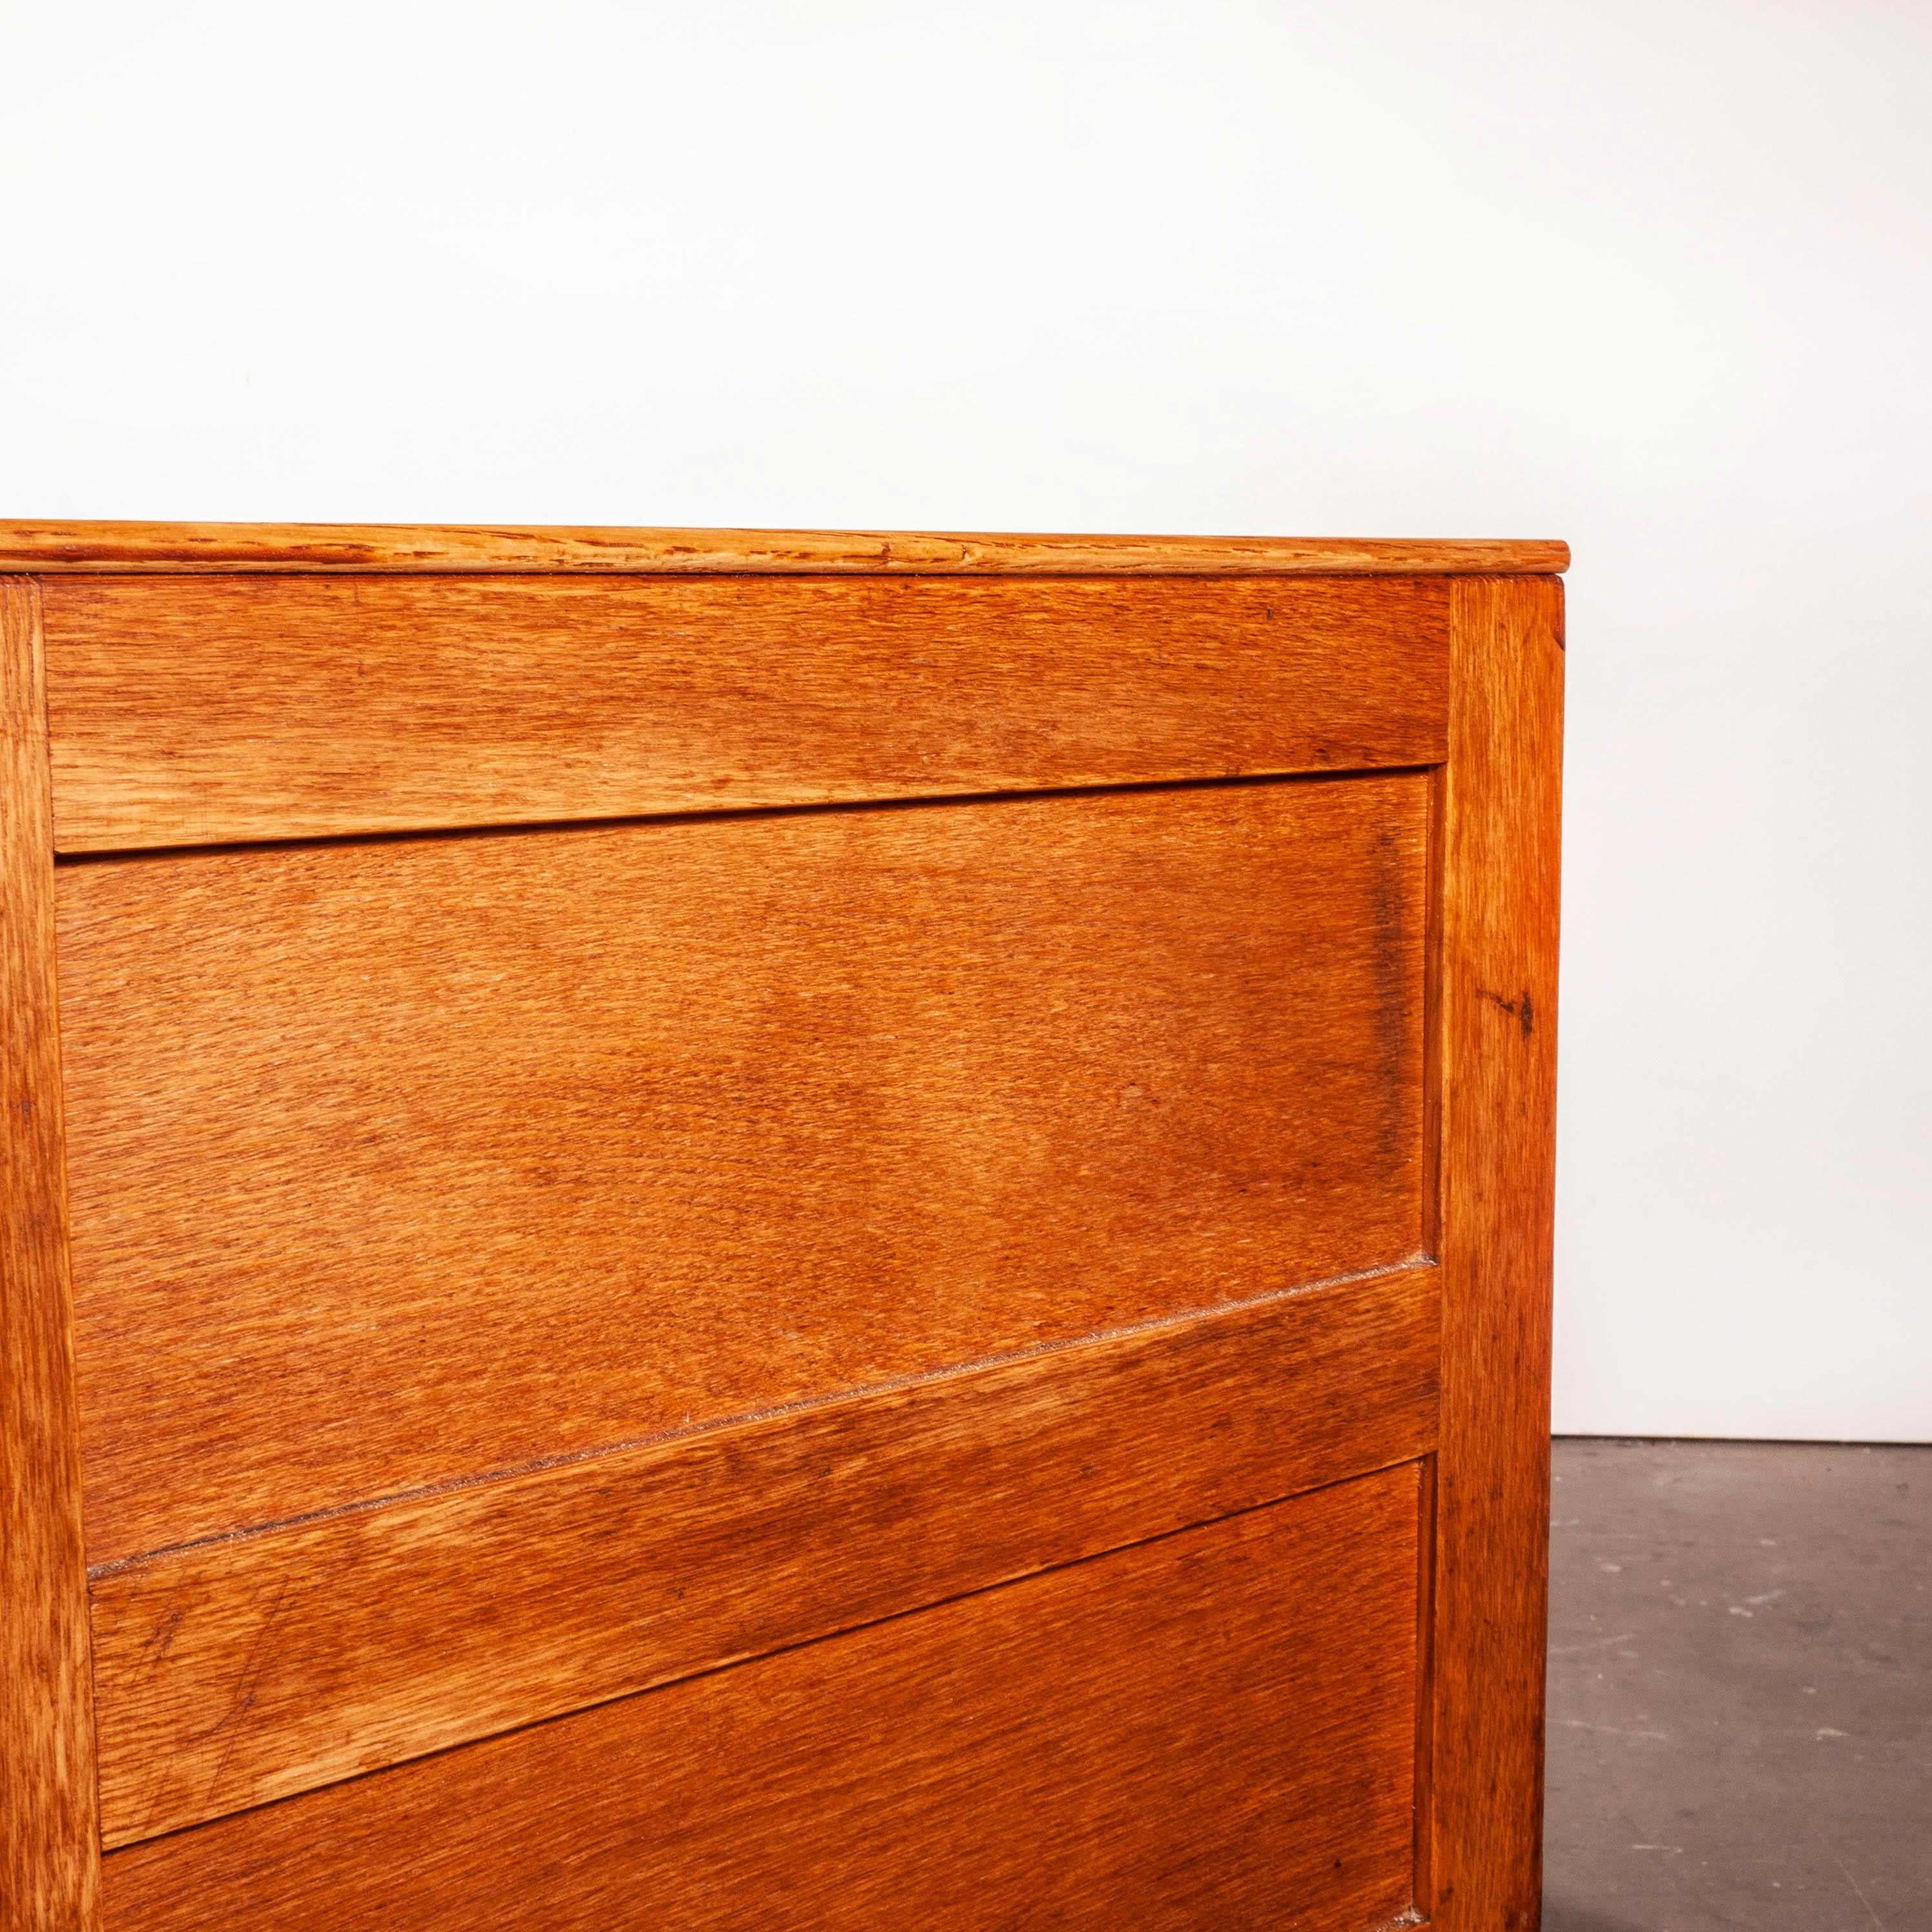 1950s oak low multi drawer chest of drawers – storage cabinet – sideboard
1950s low multi drawer chest of drawers – storage cabinet. With forty eight drawers this is a stunning practical chest. Sourced from a German bank this was originally used